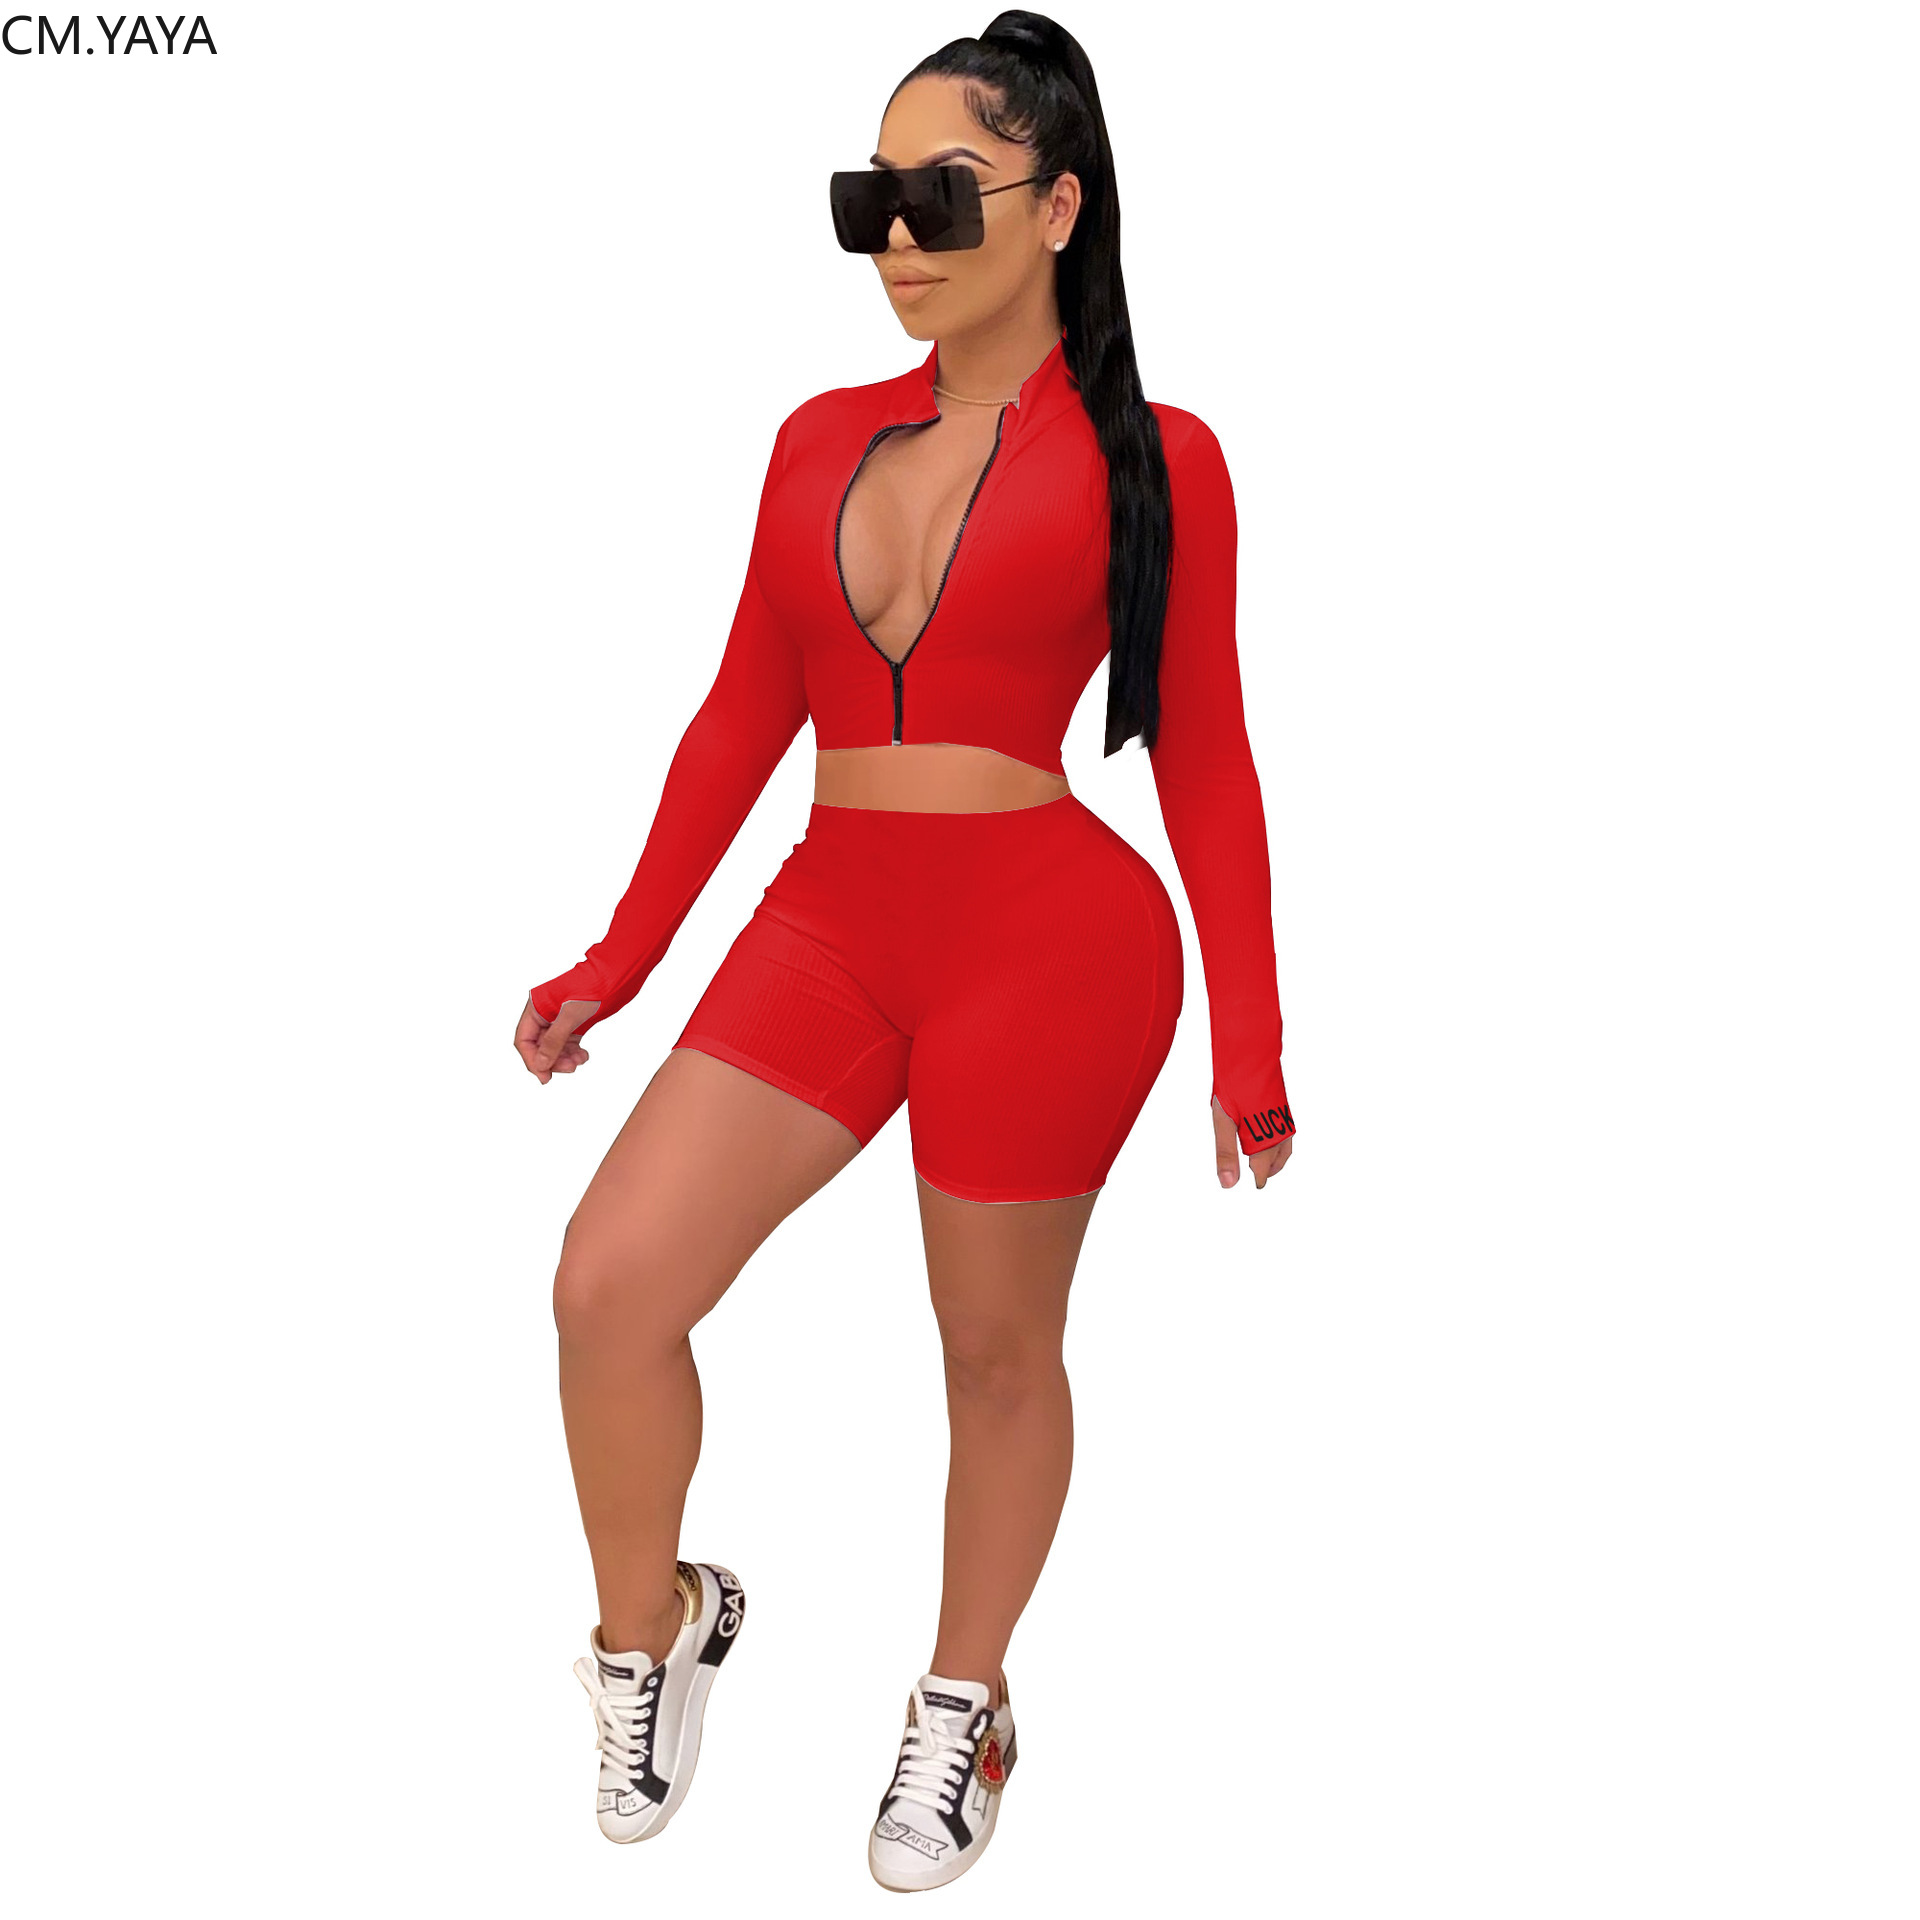 CM.YAYA Sportwear Knitted Ribbed Lucky Embroidery Long Sleeve Zipper Women's Set Tops Shorts Pants Suit Tracksuit Matching Set